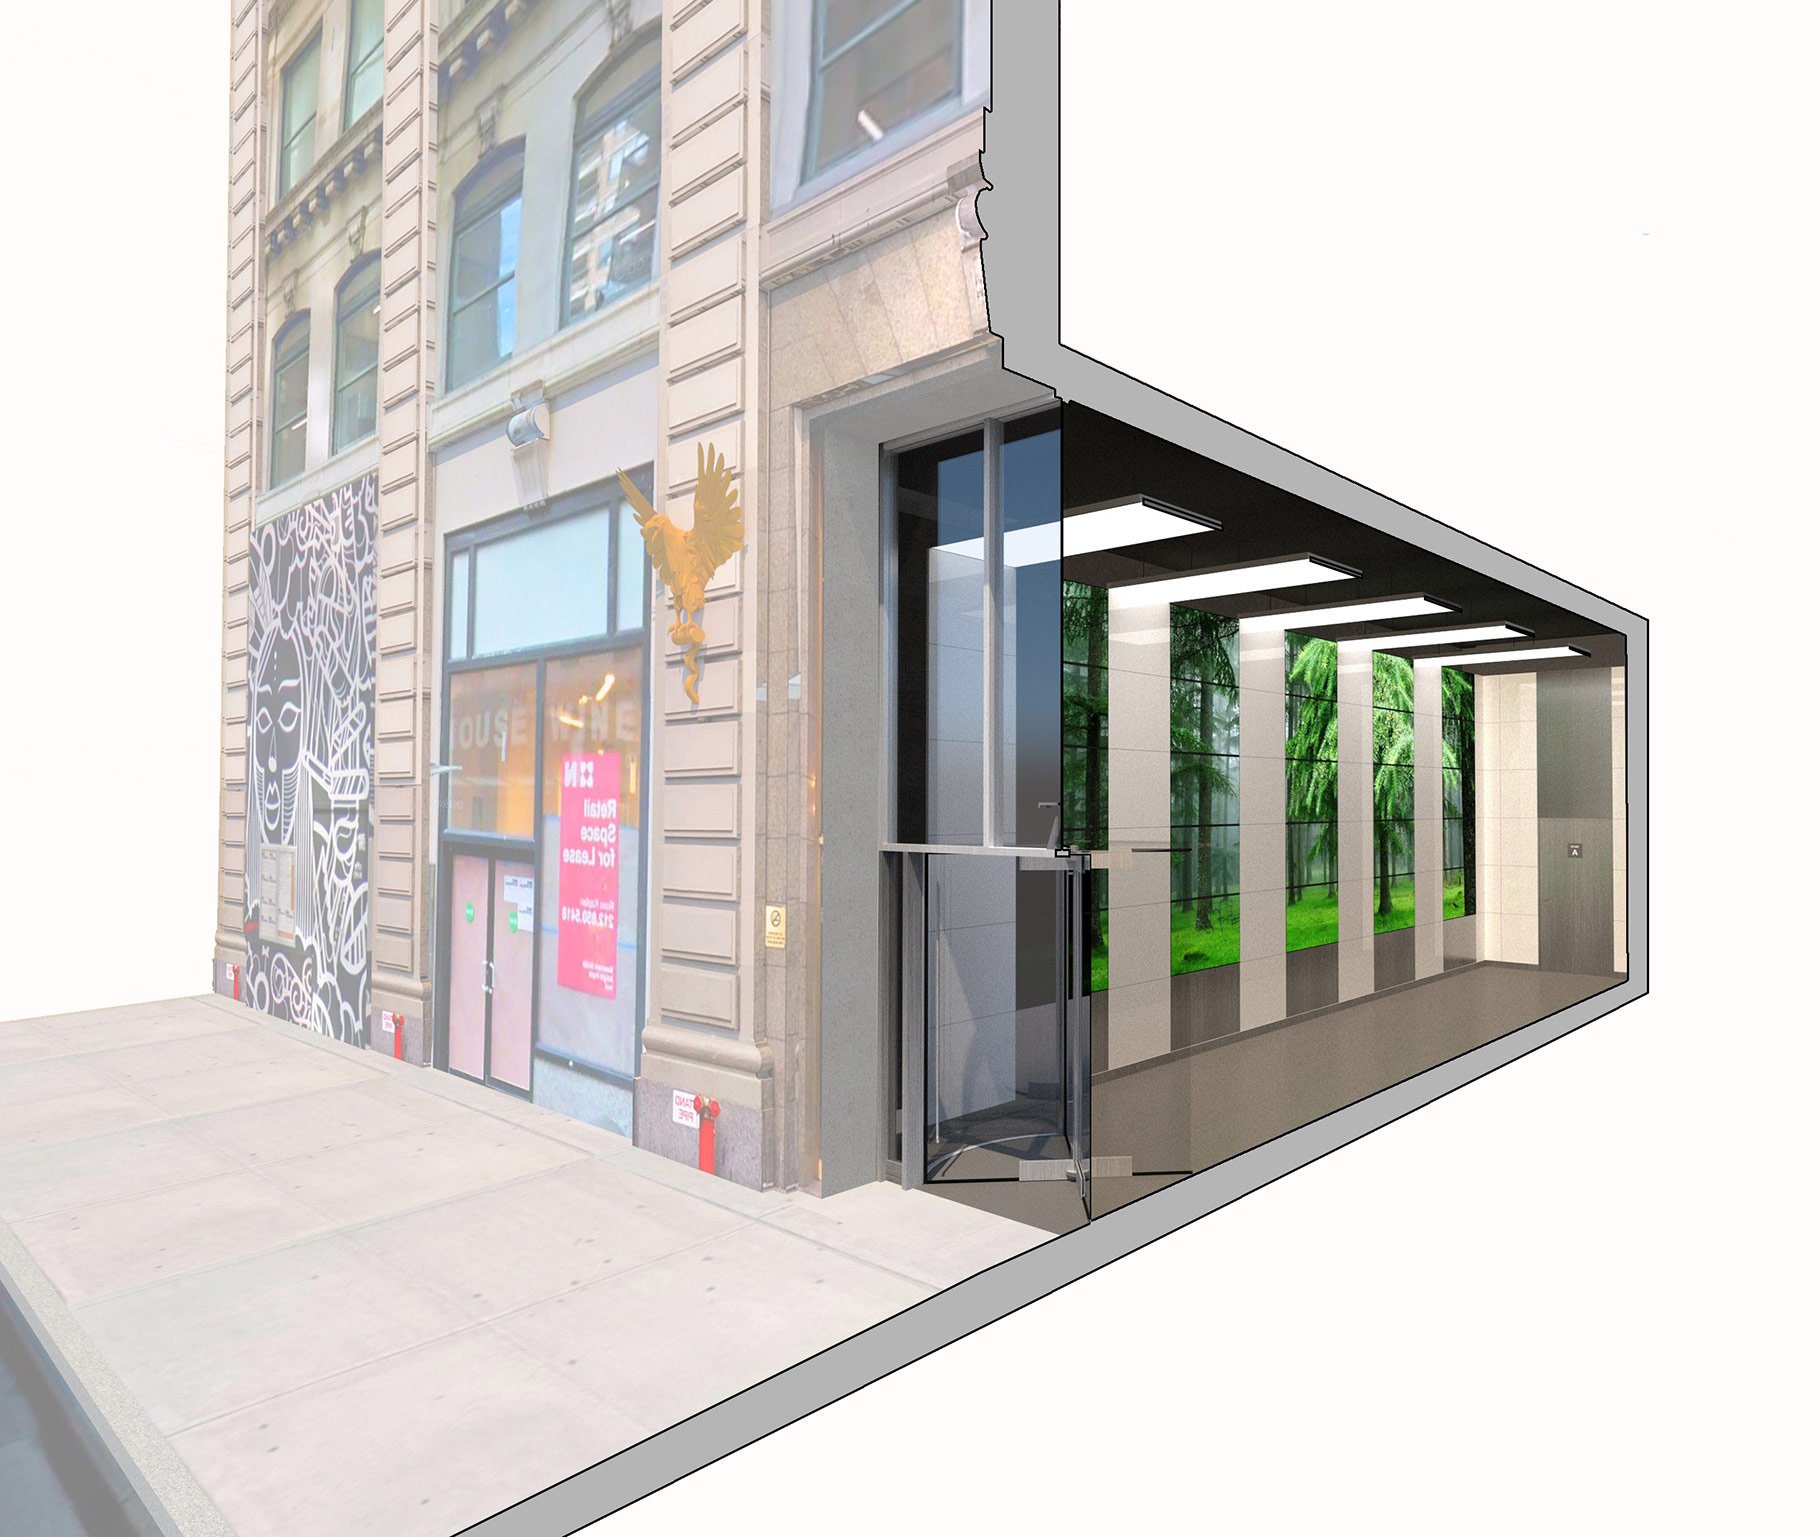 Soho Commercial Lobby NYC Architect Architecture Renovation Renovate Elevecture Glass Custom Digital Display Modular Light Panels Section Rendering